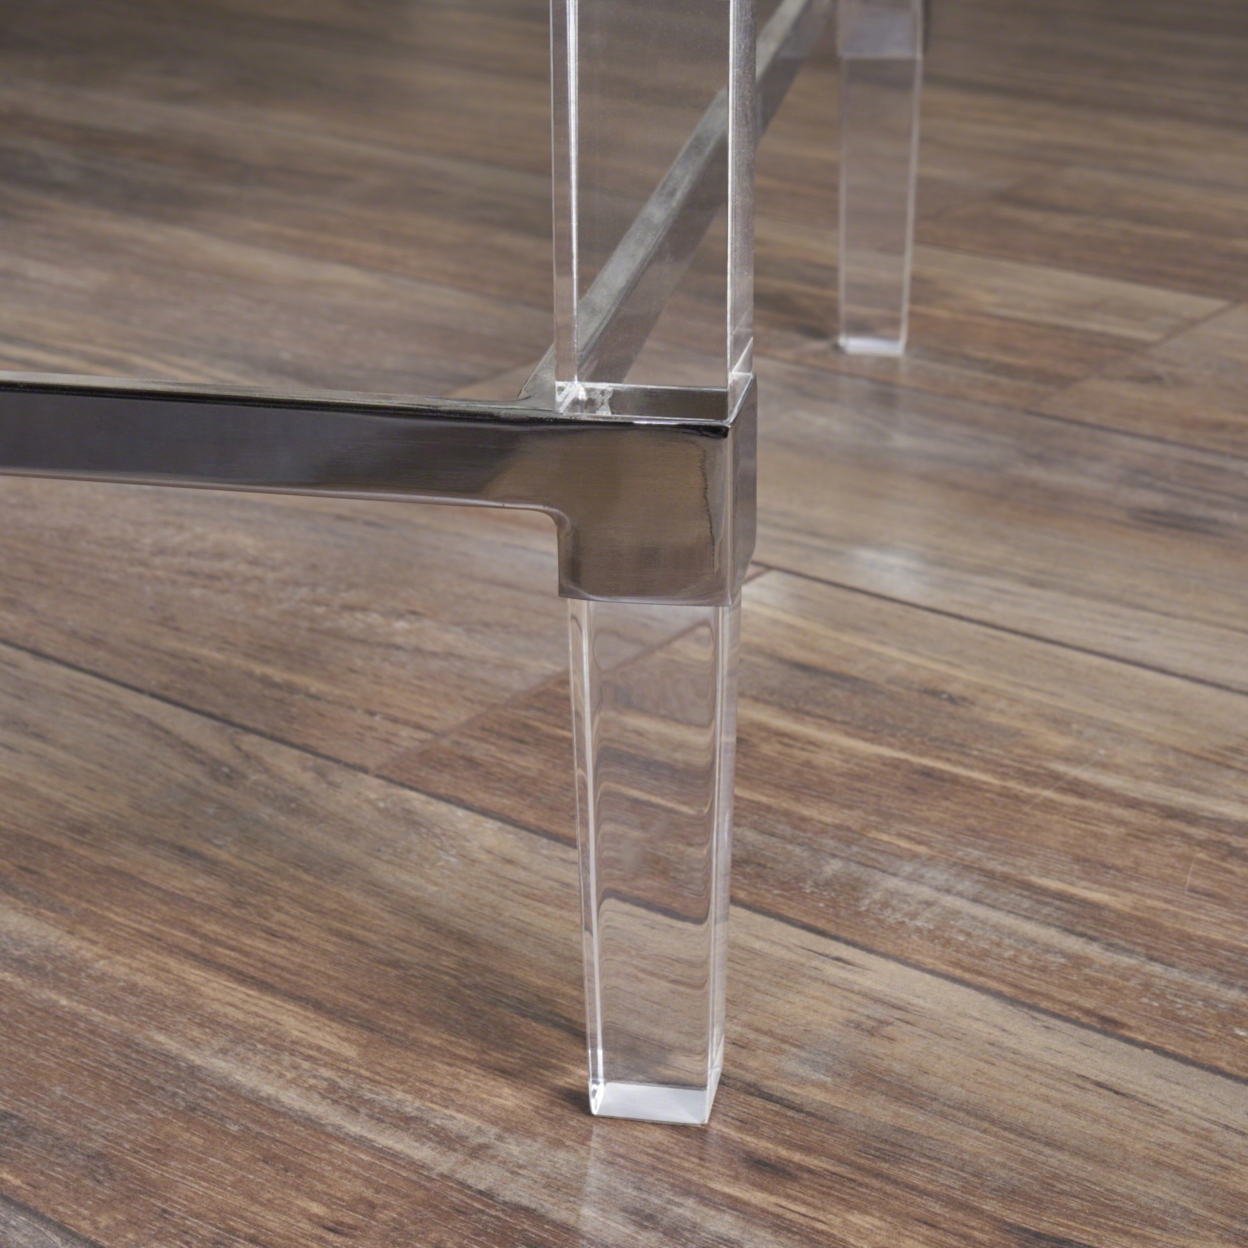 Bayor Modern Tempered Glass Coffee Table With Acrylic And Iron Accents